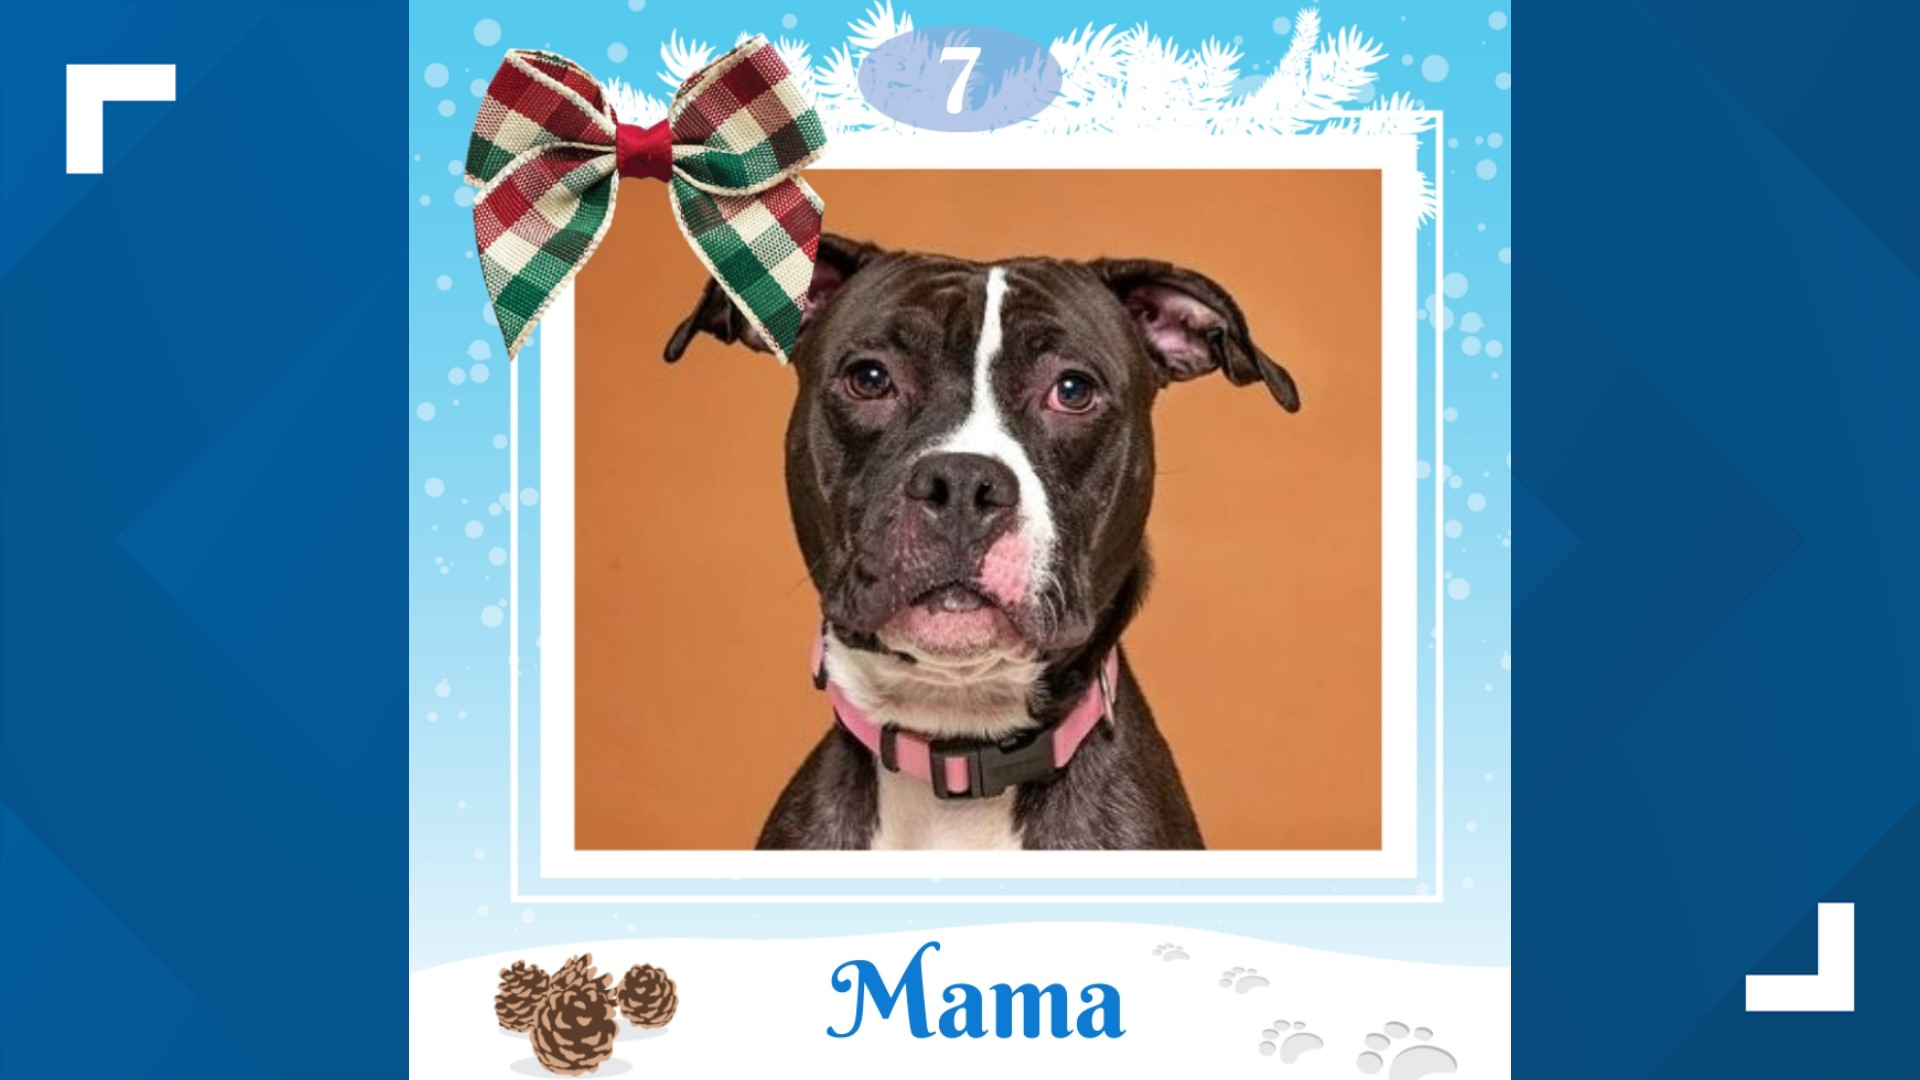 Mama is a loving 2-year-old female pit bull terrier. Now that all of her babies have been adopted, Mama is looking to find the perfect home and family of her own.